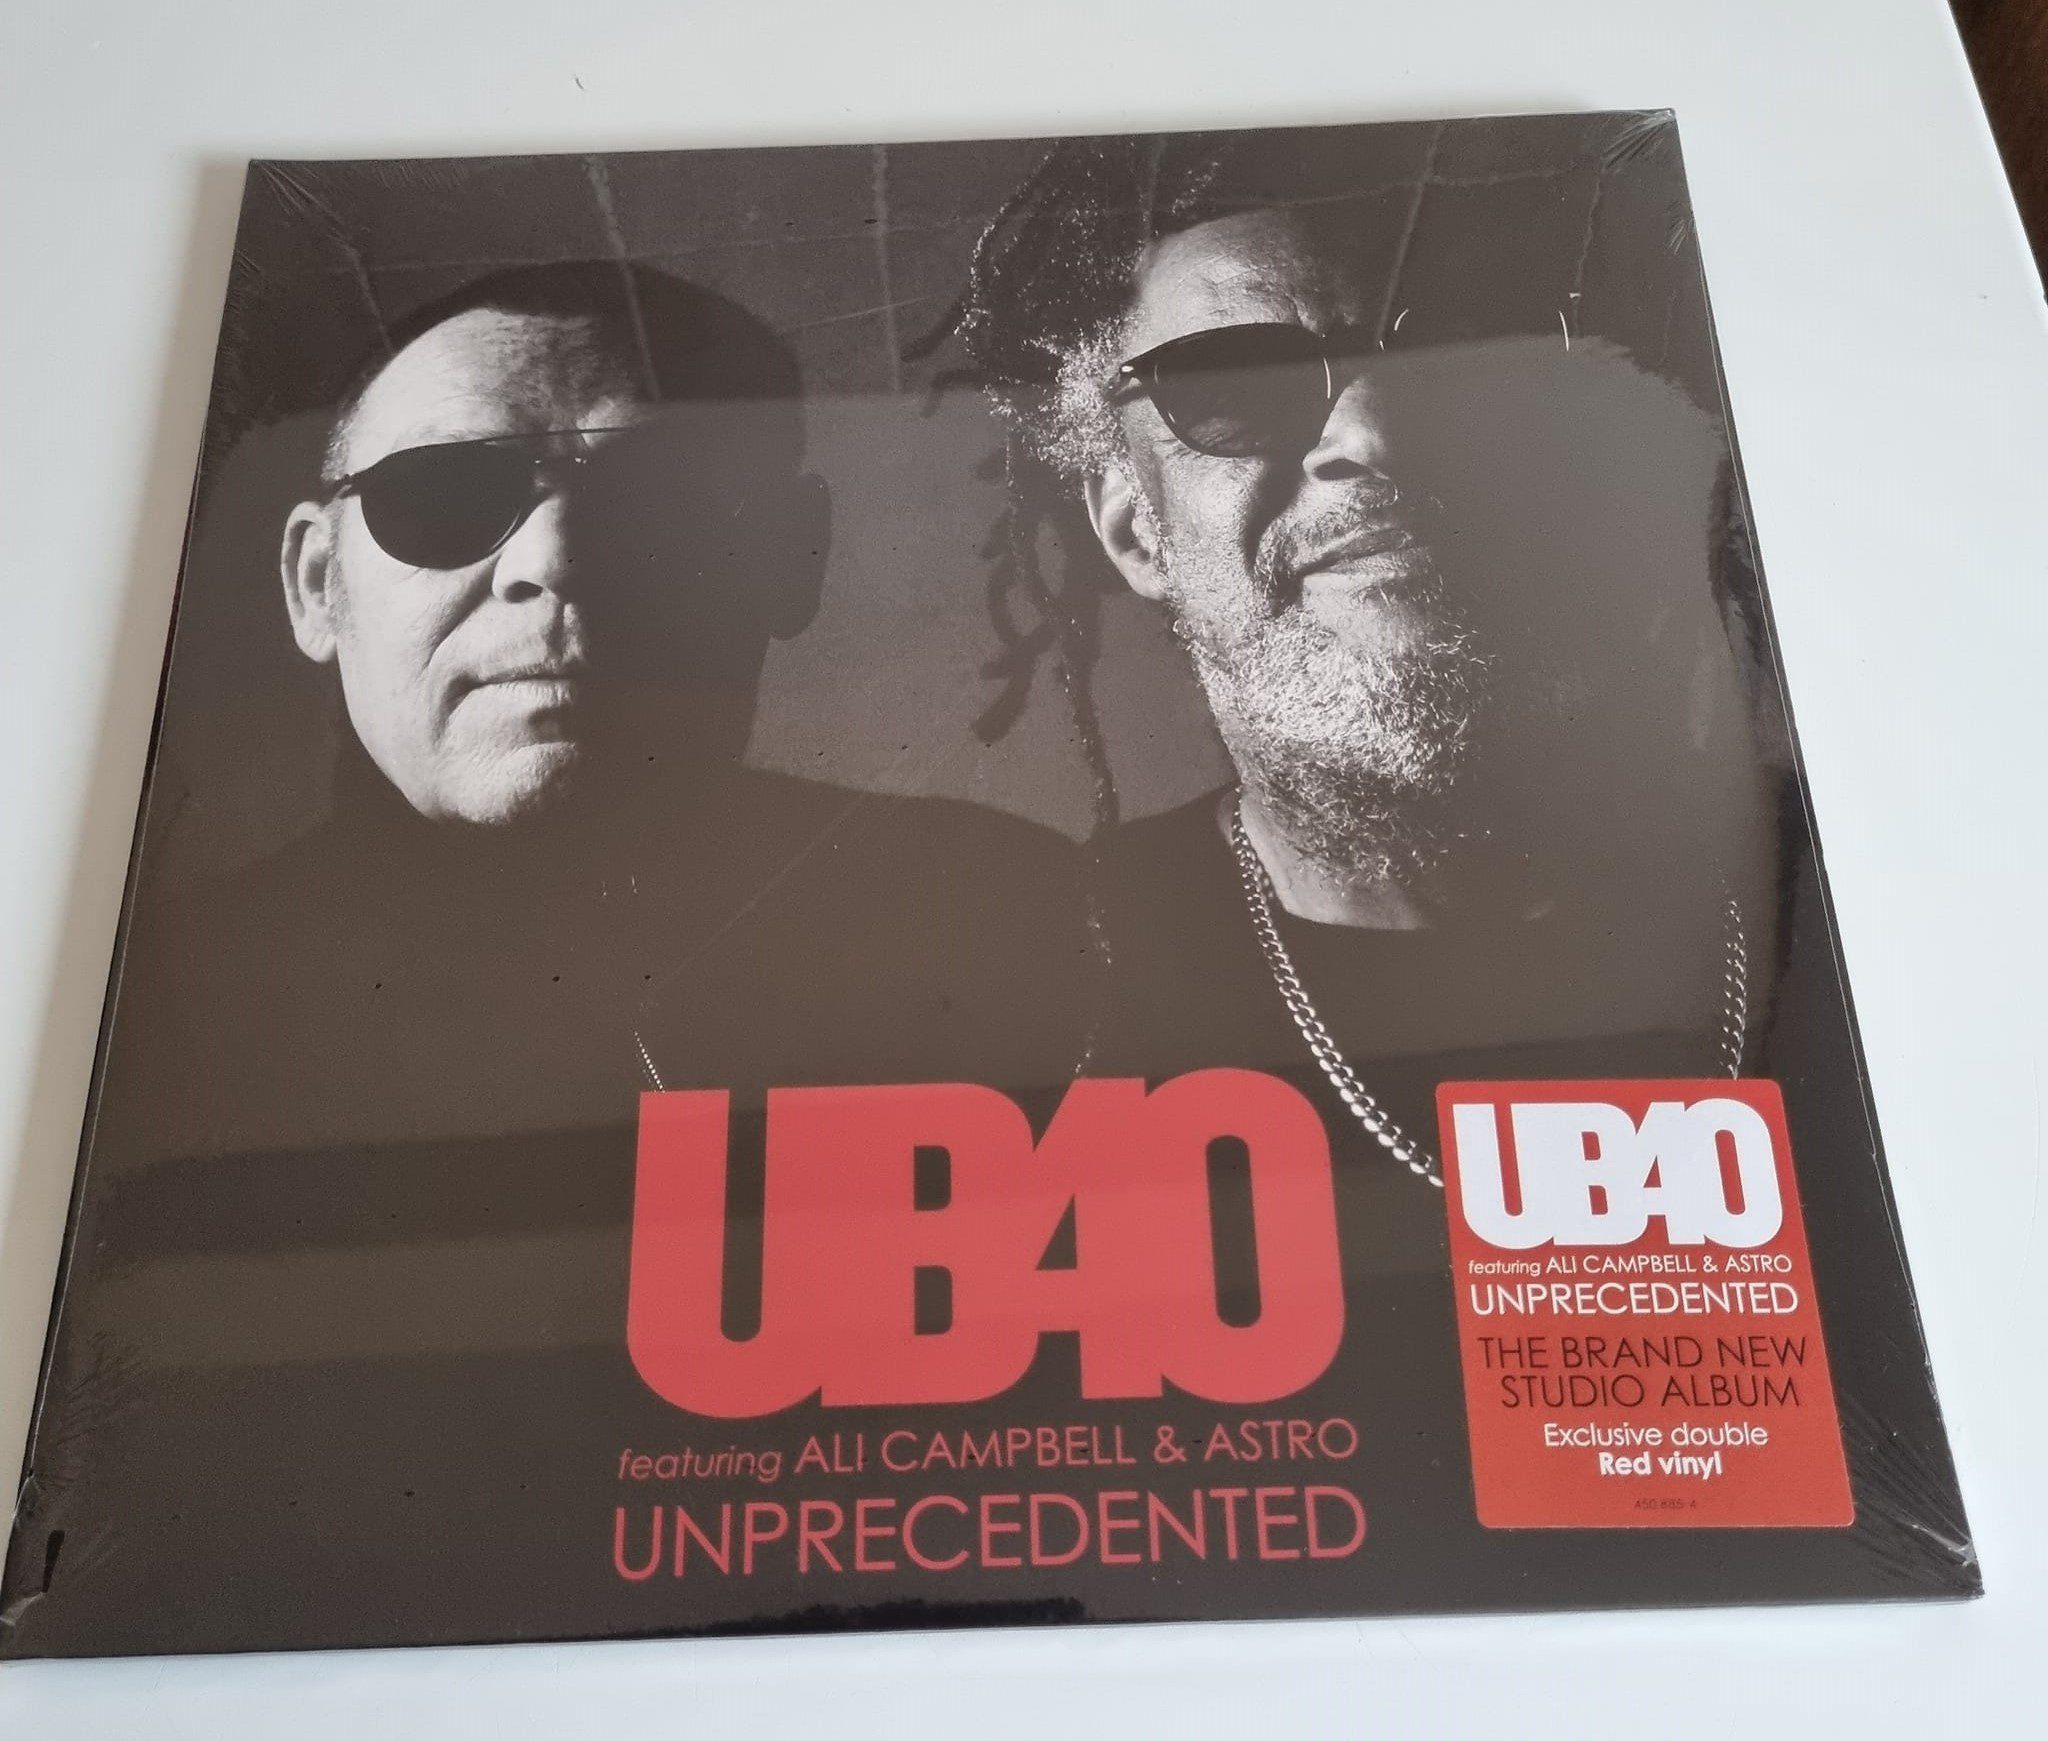 Buy this rare UB40 record by clicking here